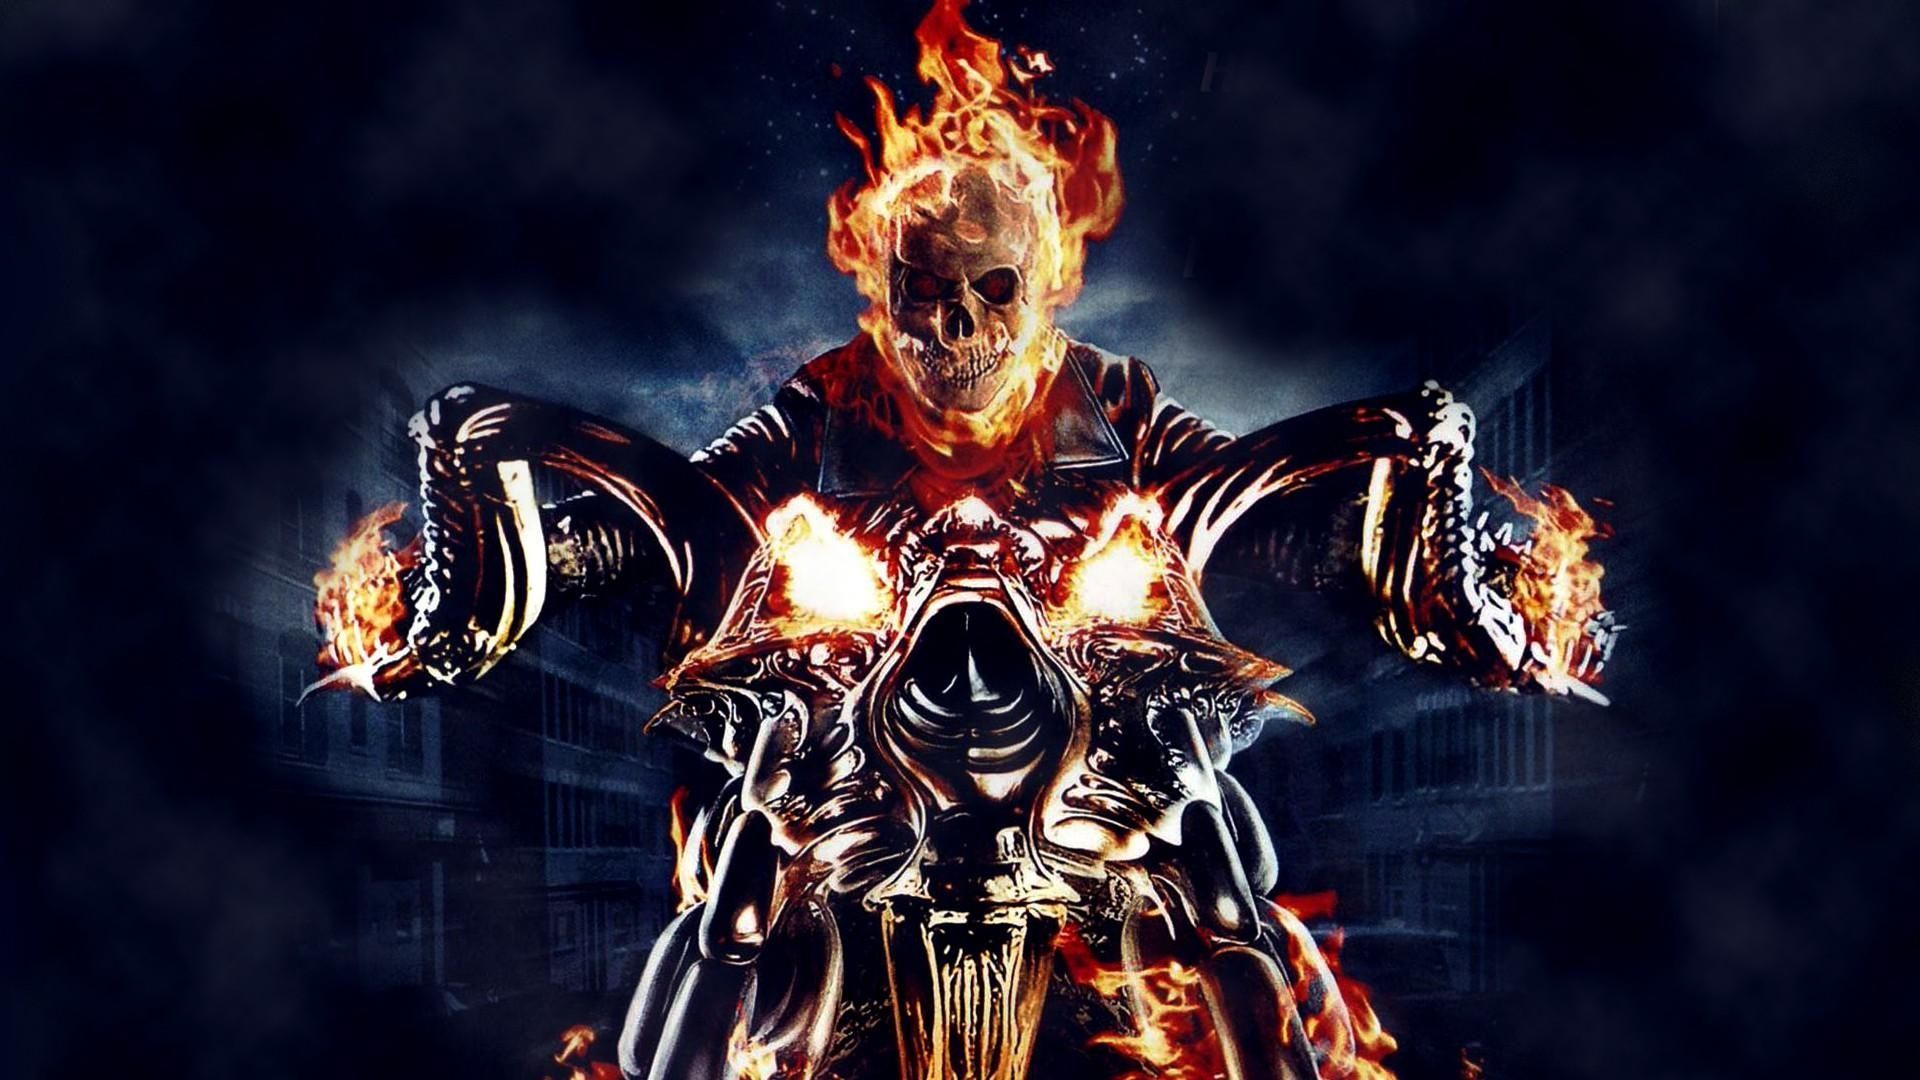 Download Wallpaper 1920x1080 Ghost rider, Motorcycle, Fire, Skull